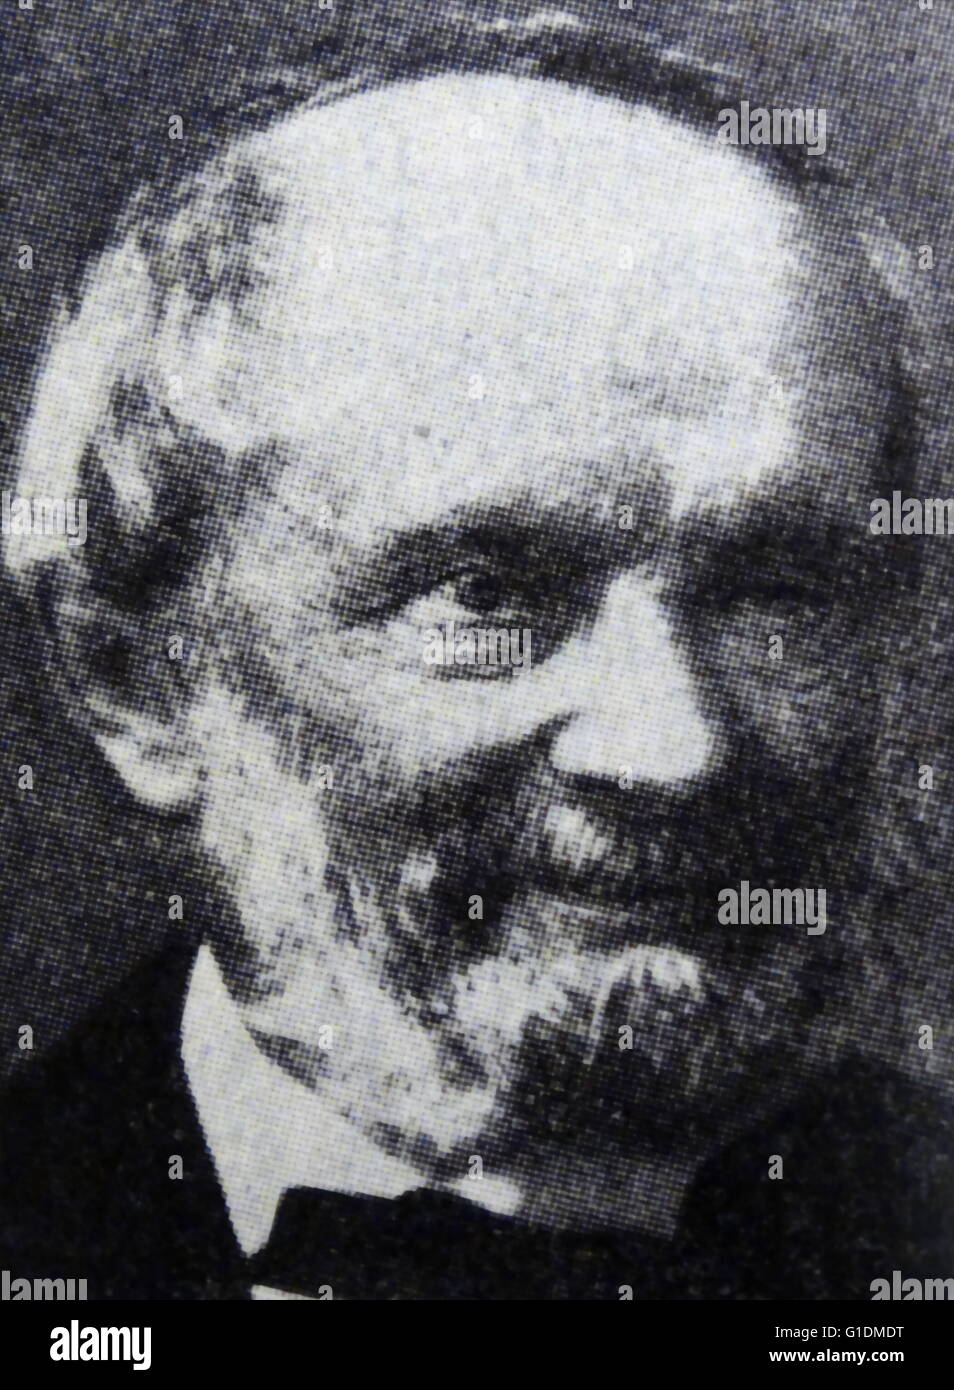 Photographic portrait of Wilhelm Eduard Weber (1804-1891) a German physicist and co-inventor of the first electromagnetic telegraph. Dated 20th Century Stock Photo